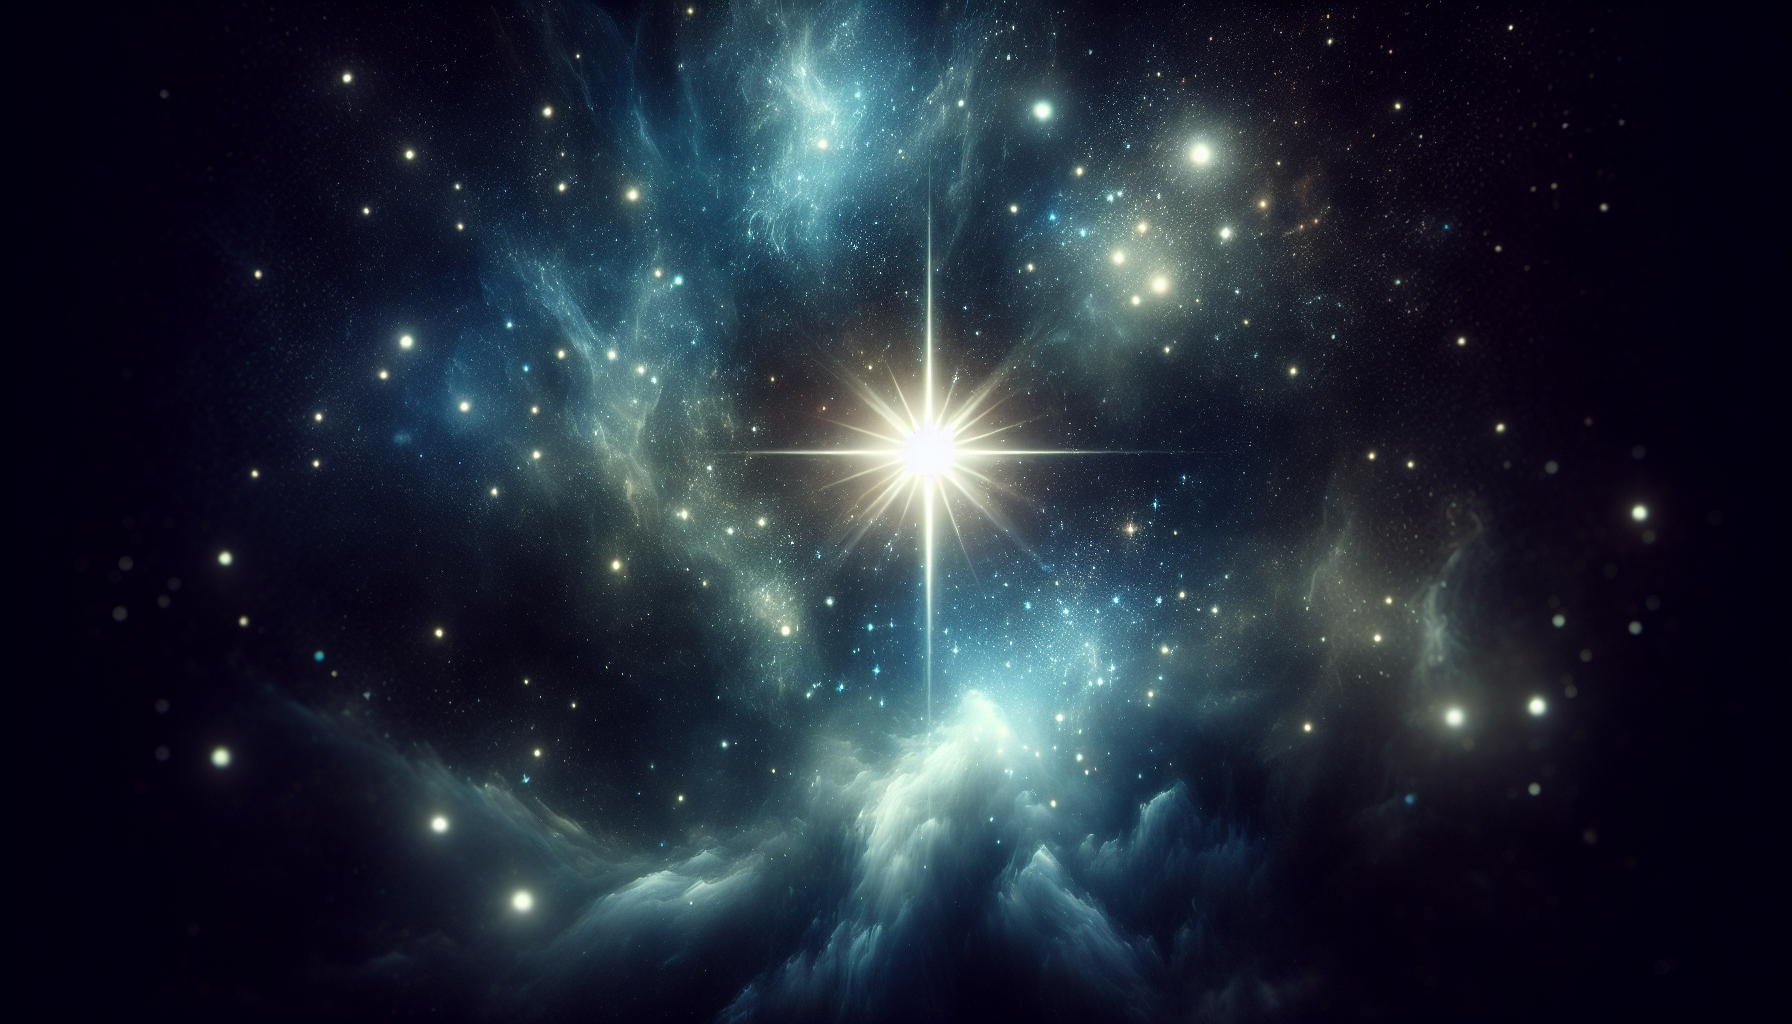 What Psalm Talks About Stars?